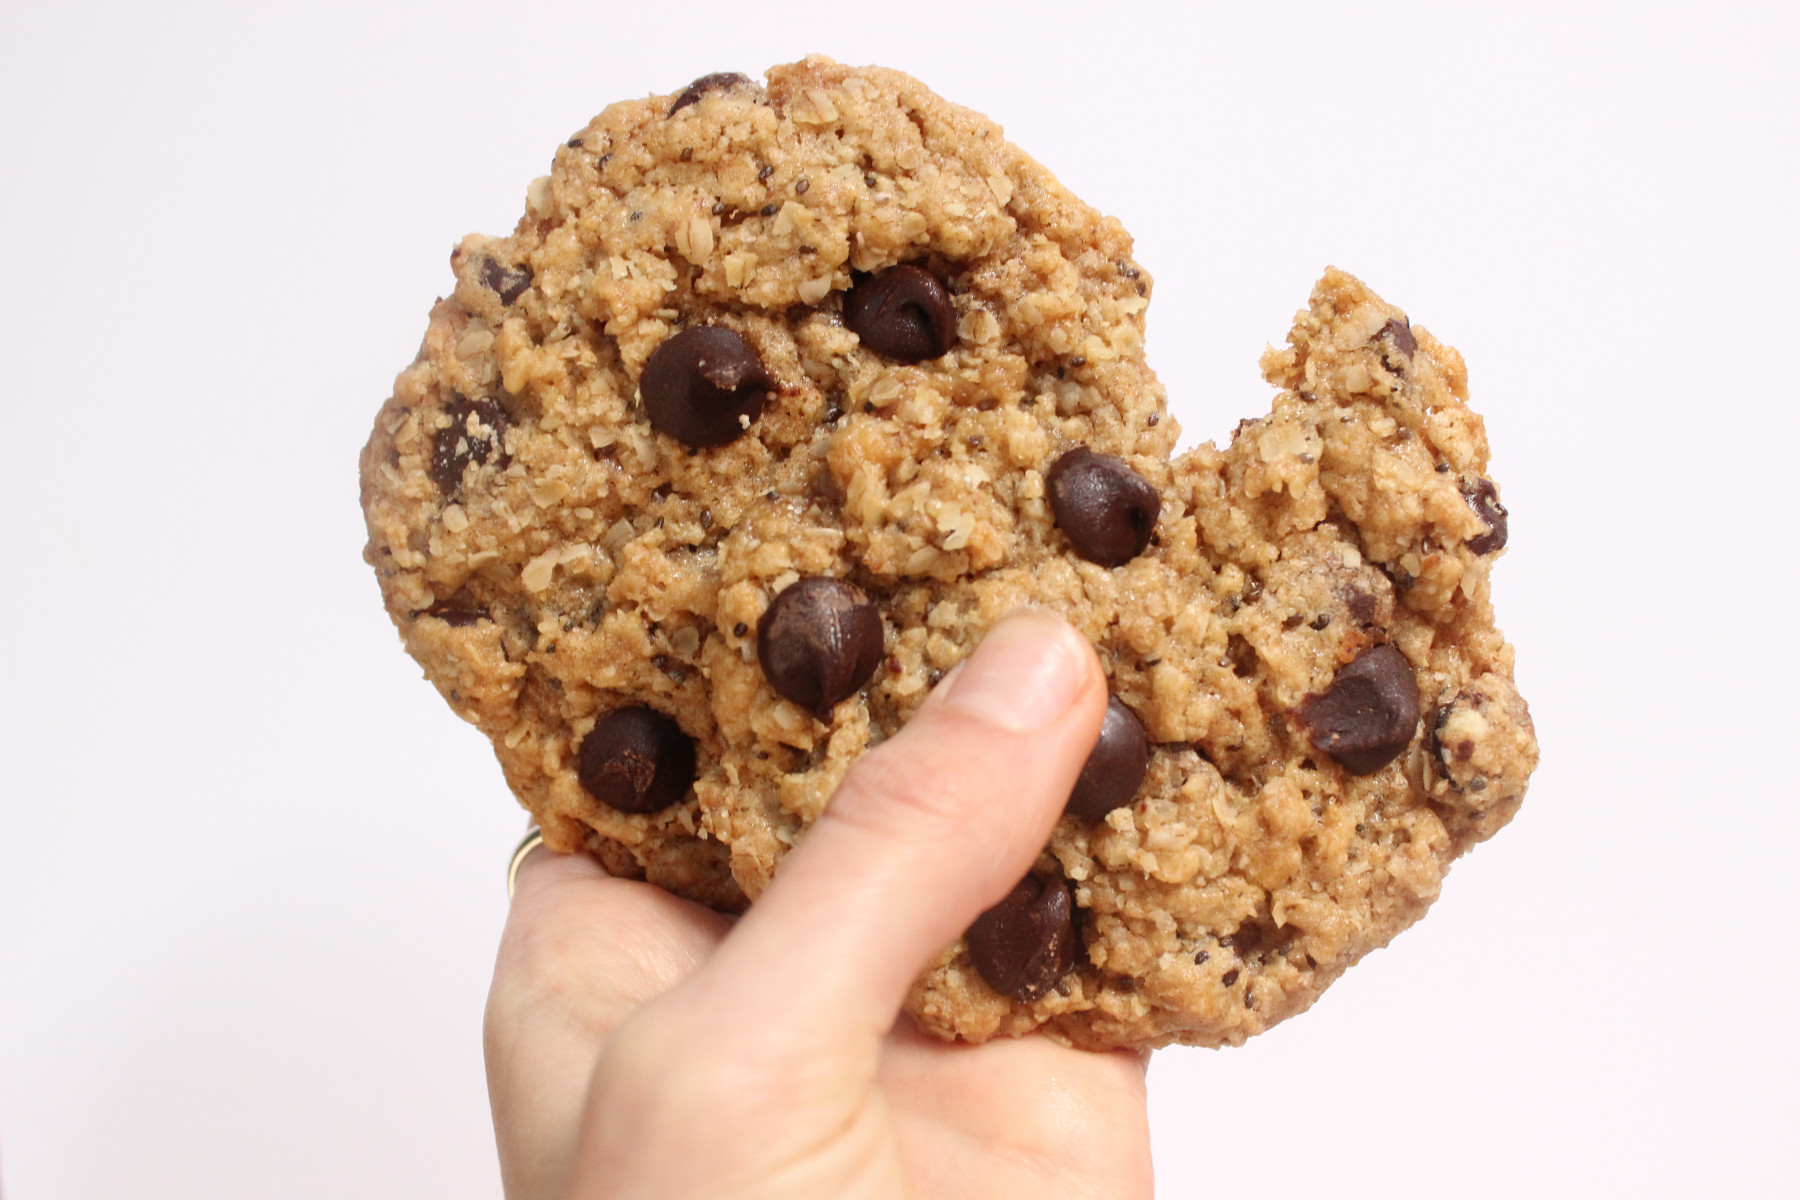 hand holding chocolate chip cookies